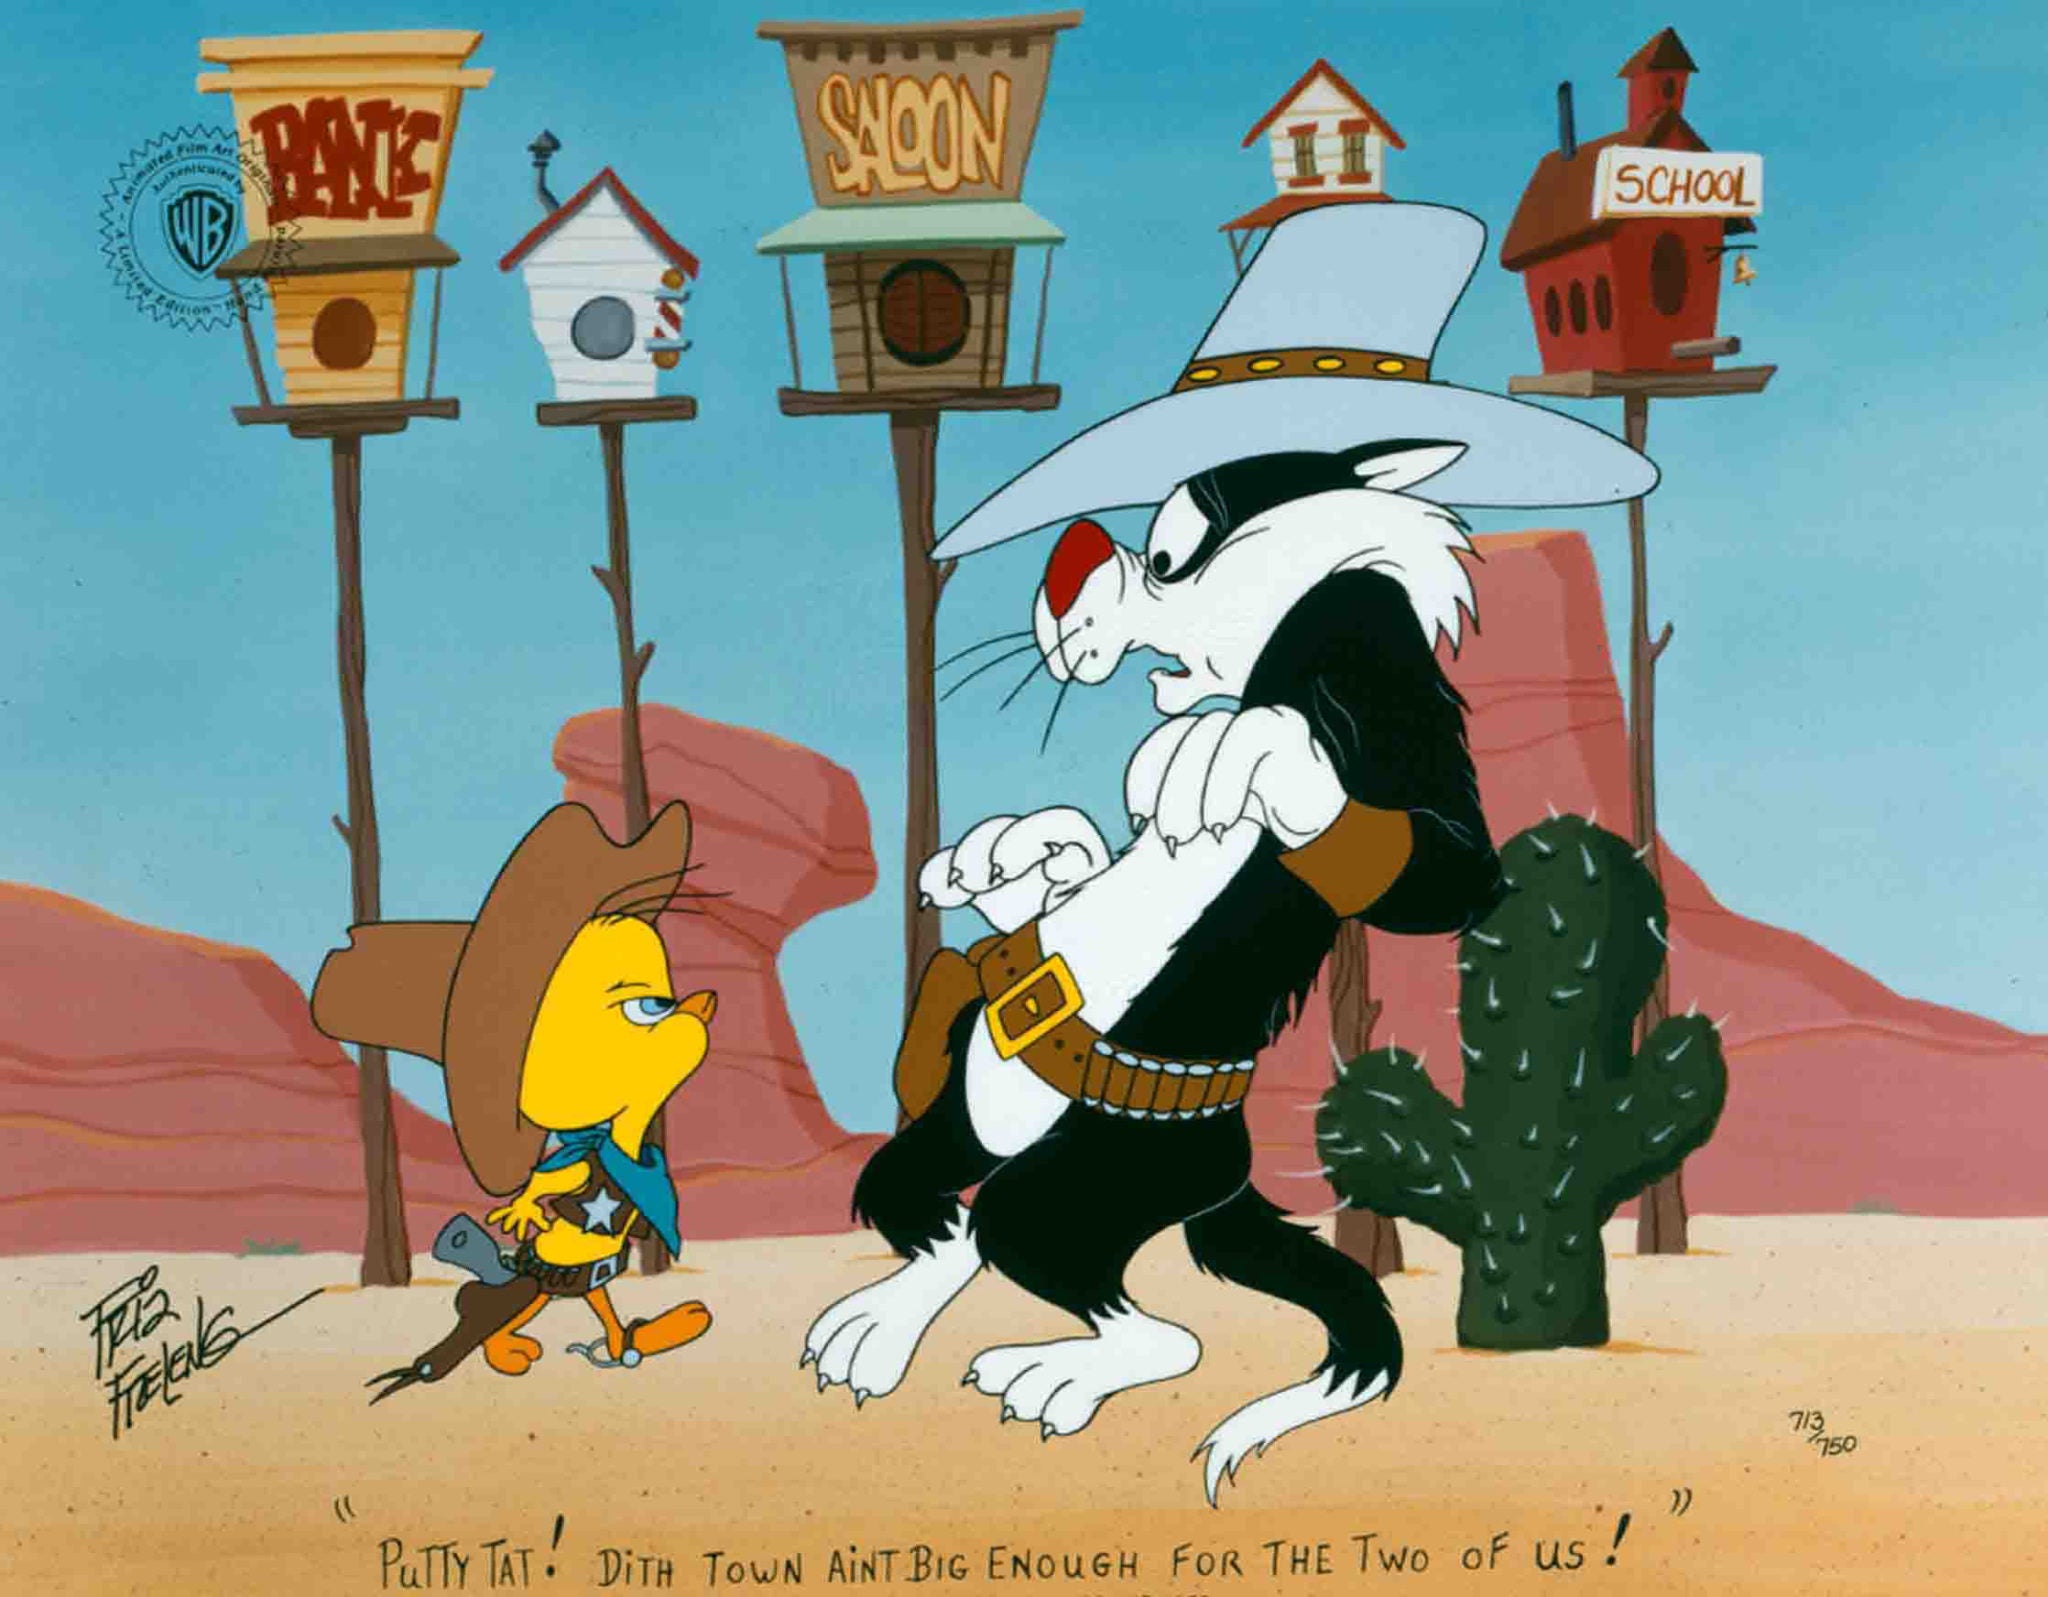 Tweety stands his ground to protect his town against Sylvester.